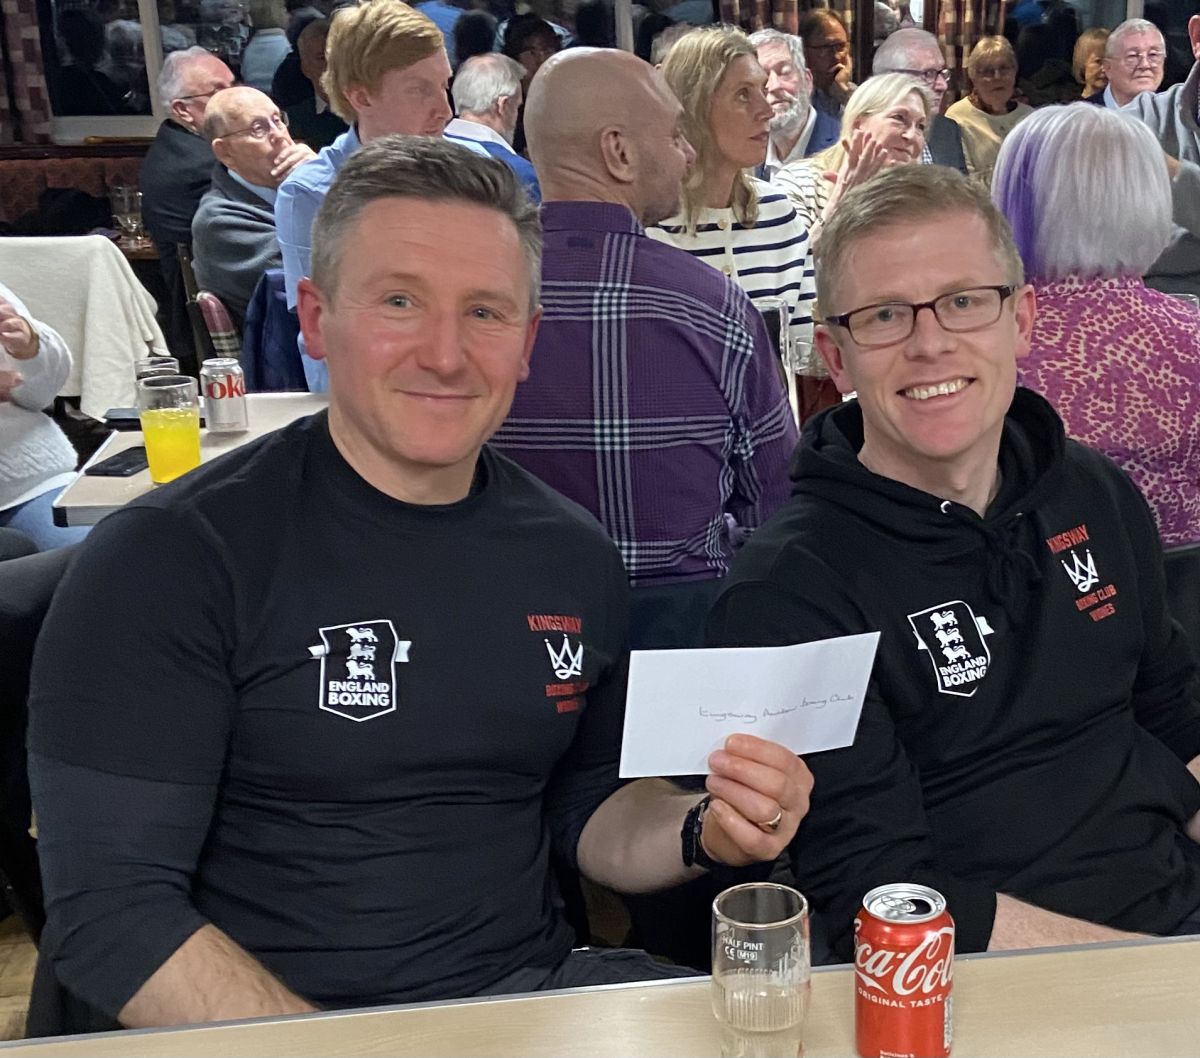 Thank You and Donation Evening - Widnes Cricket Club - 